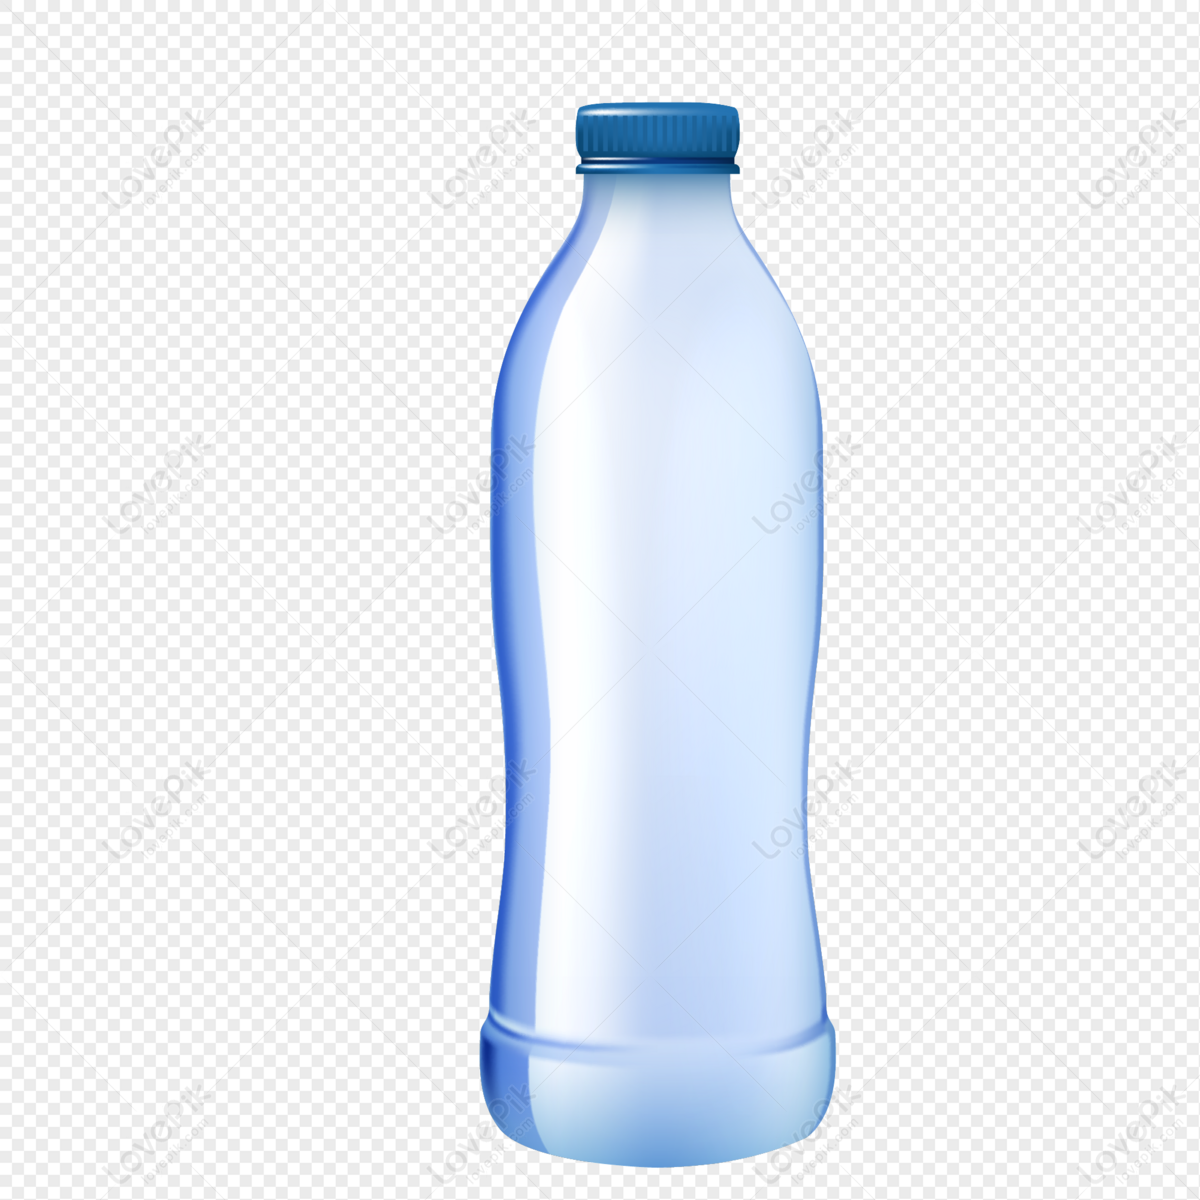 https://img.lovepik.com/free-png/20211211/lovepik-solid-color-simple-plastic-mineral-water-bottle-png-image_401509940_wh1200.png